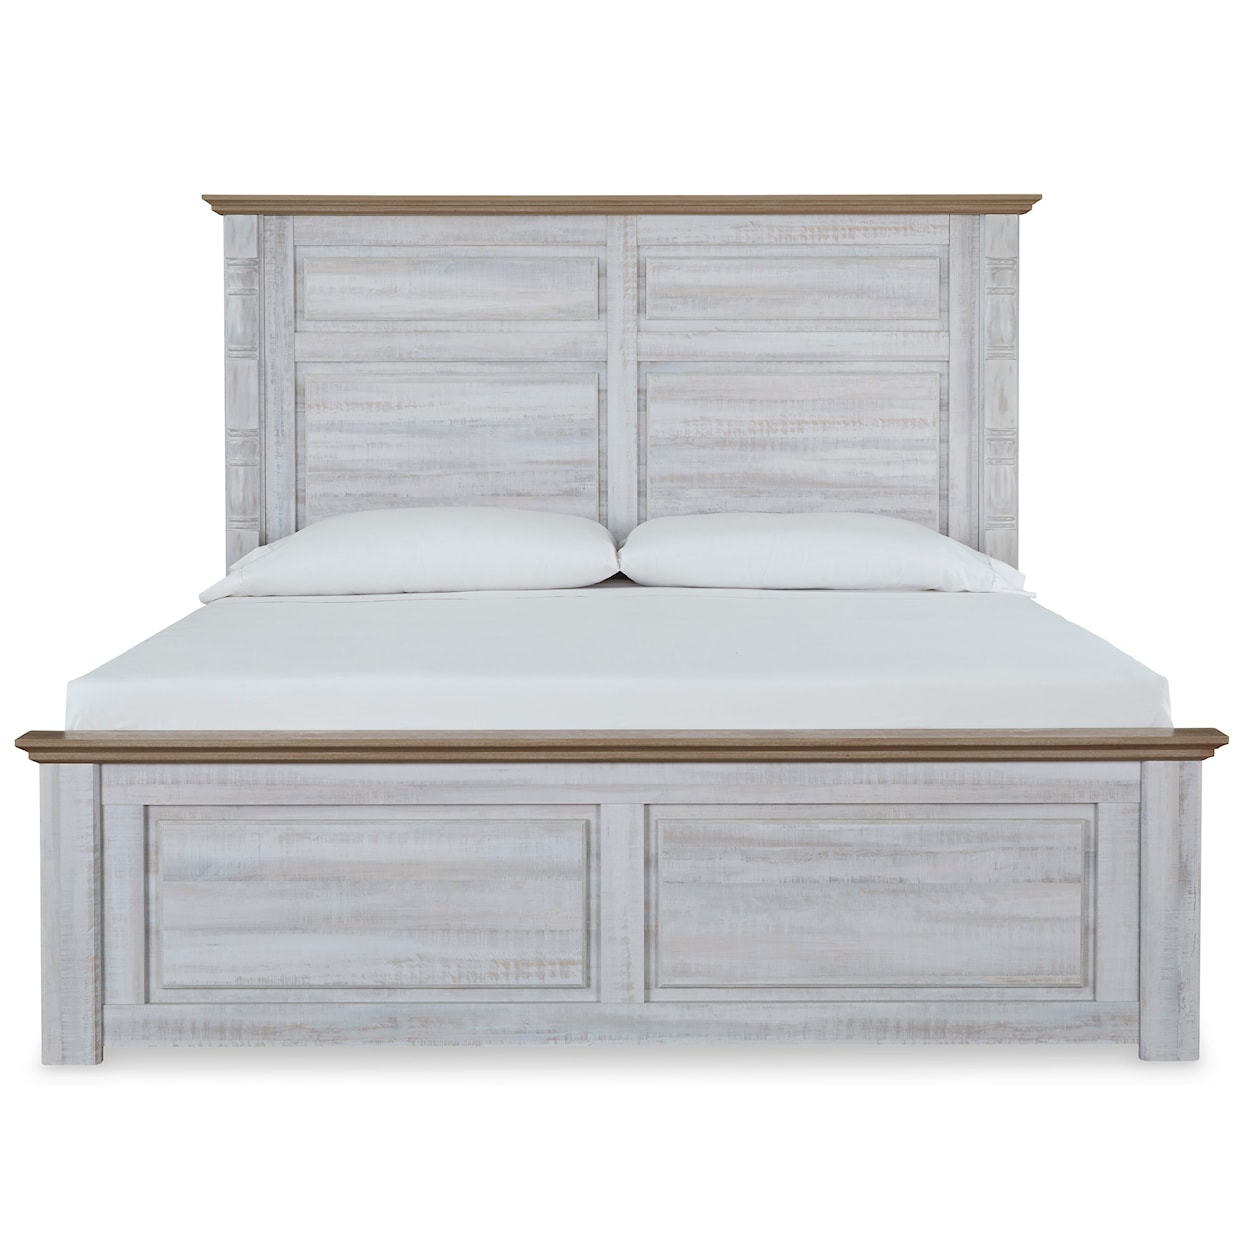 Signature Design by Ashley Haven Bay King Panel Bed